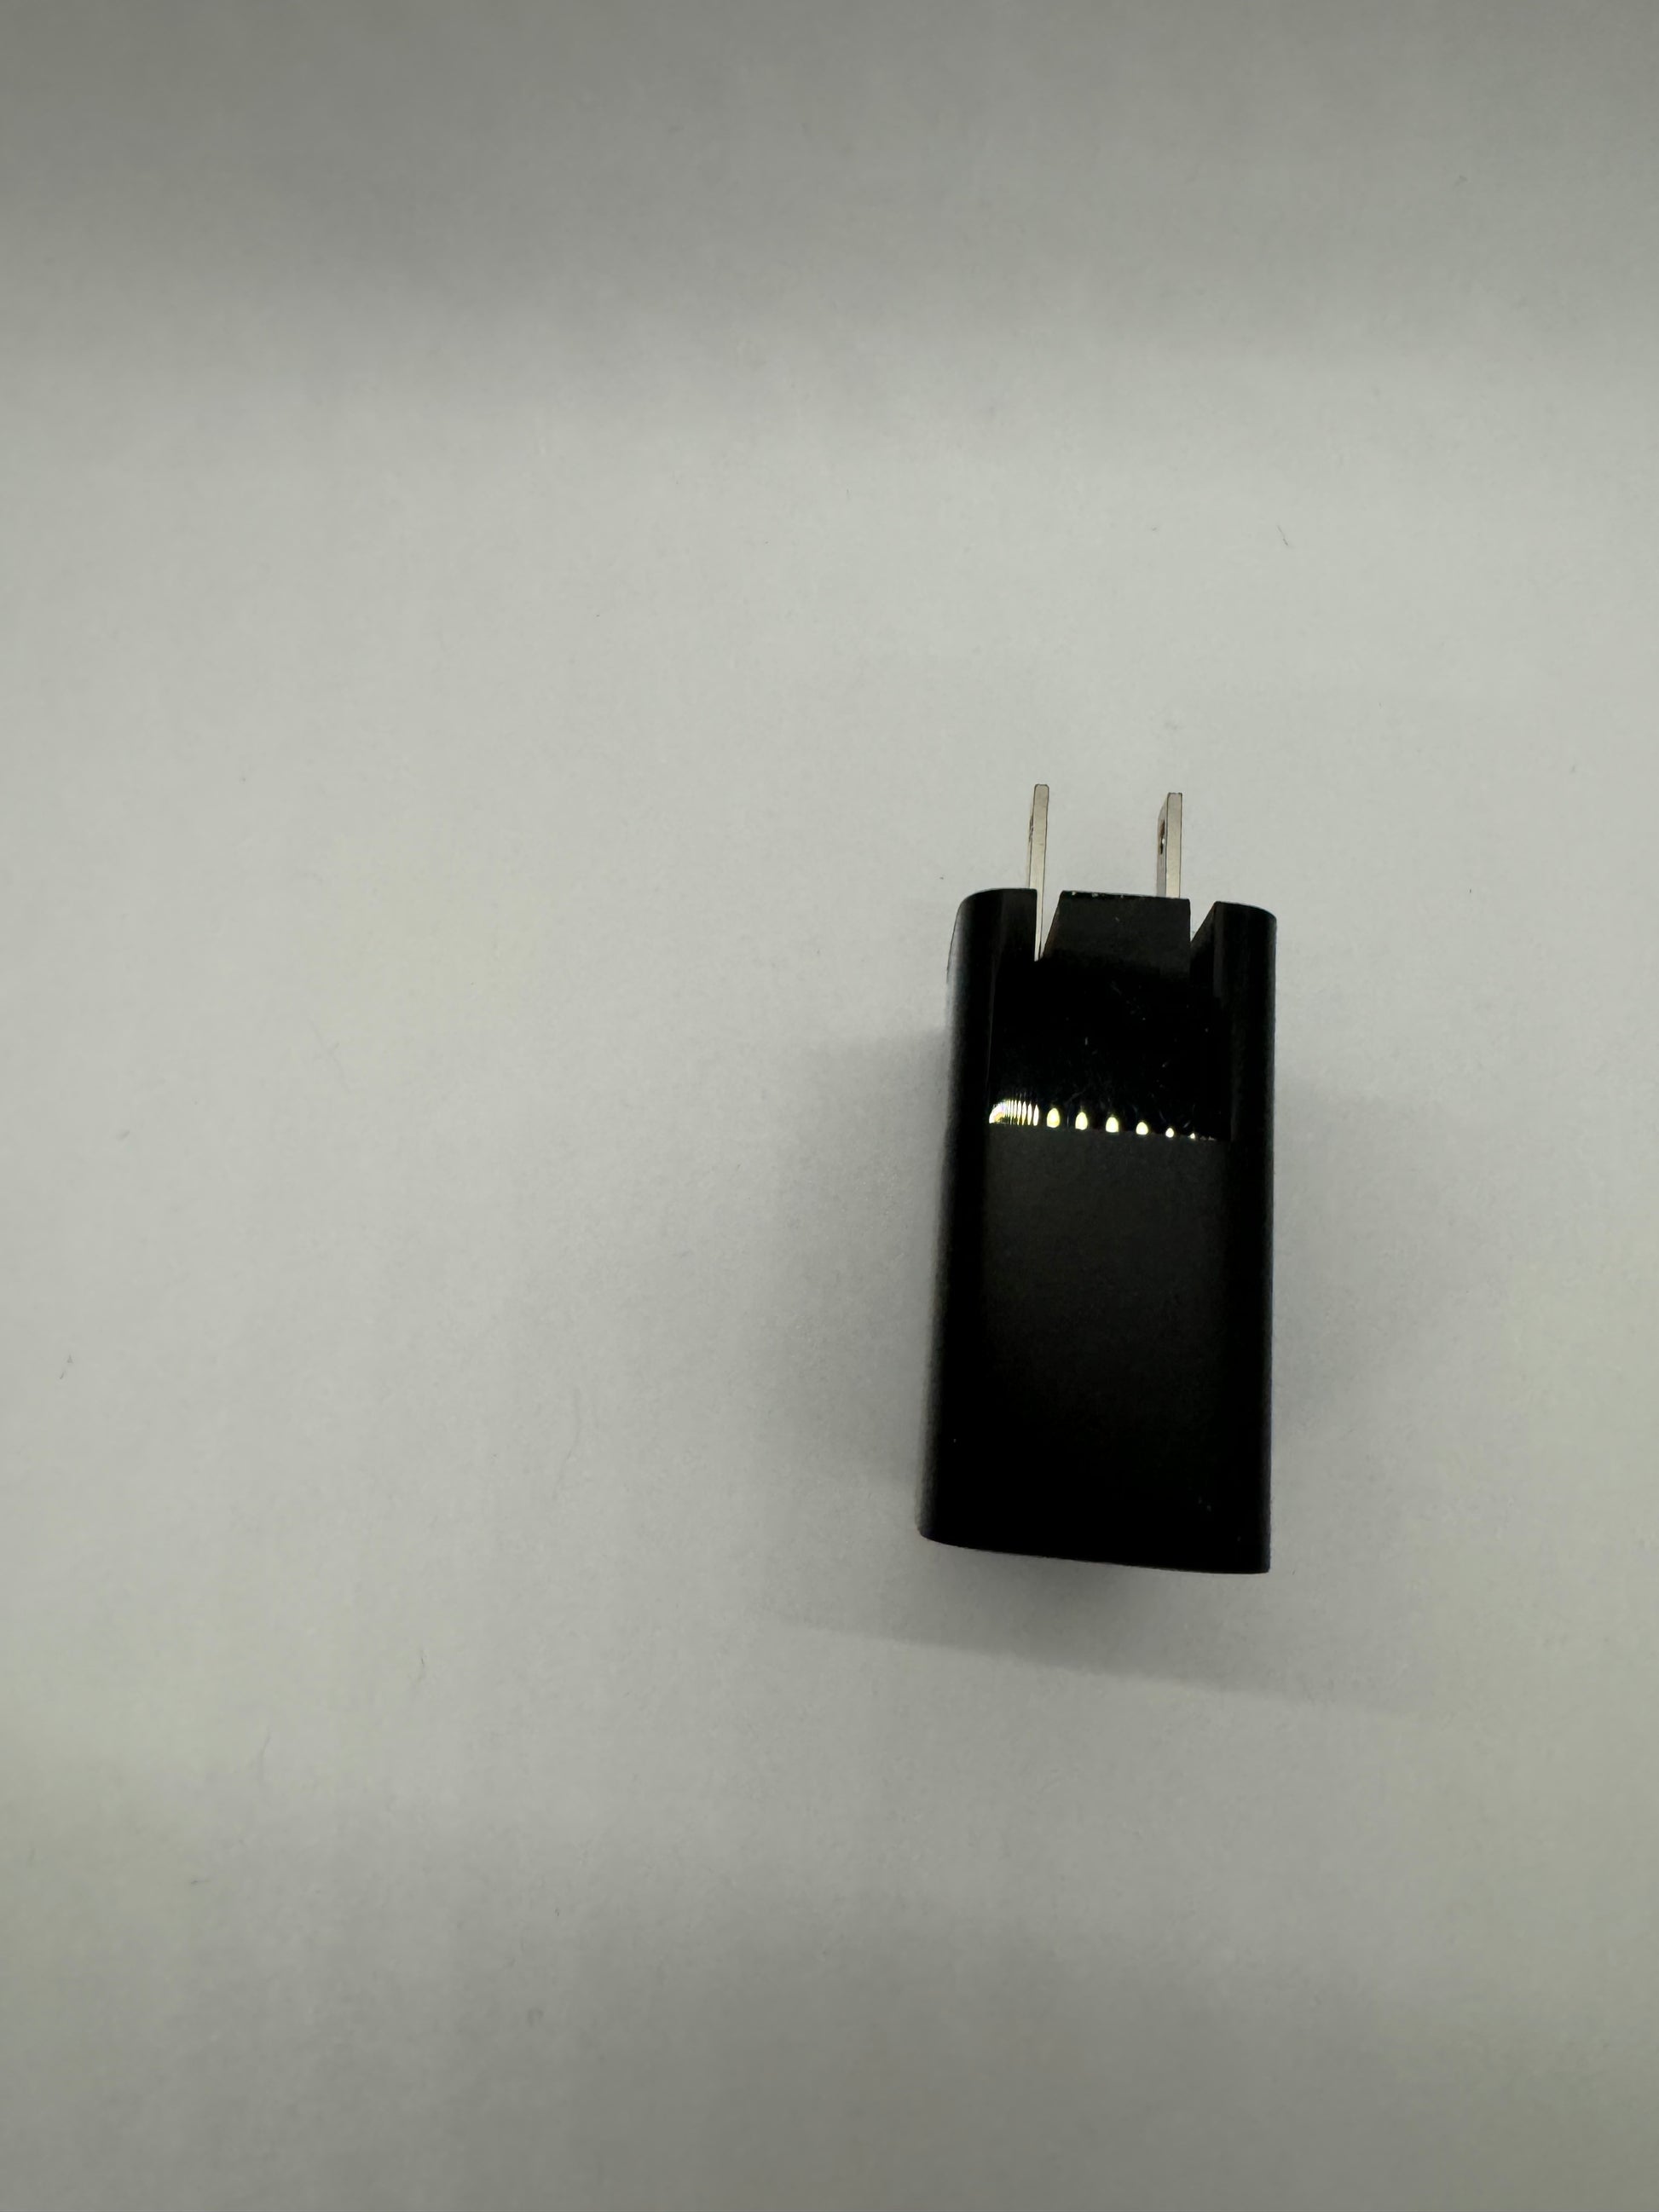 The picture shows a black rectangular object with two metal prongs sticking out from one of its shorter sides. The object appears to be a charger or adapter. The background is plain and white. The metal prongs are likely used to plug the object into an electrical outlet. There is also a series of small dots on one side of the object, which might be an indicator of some sort.